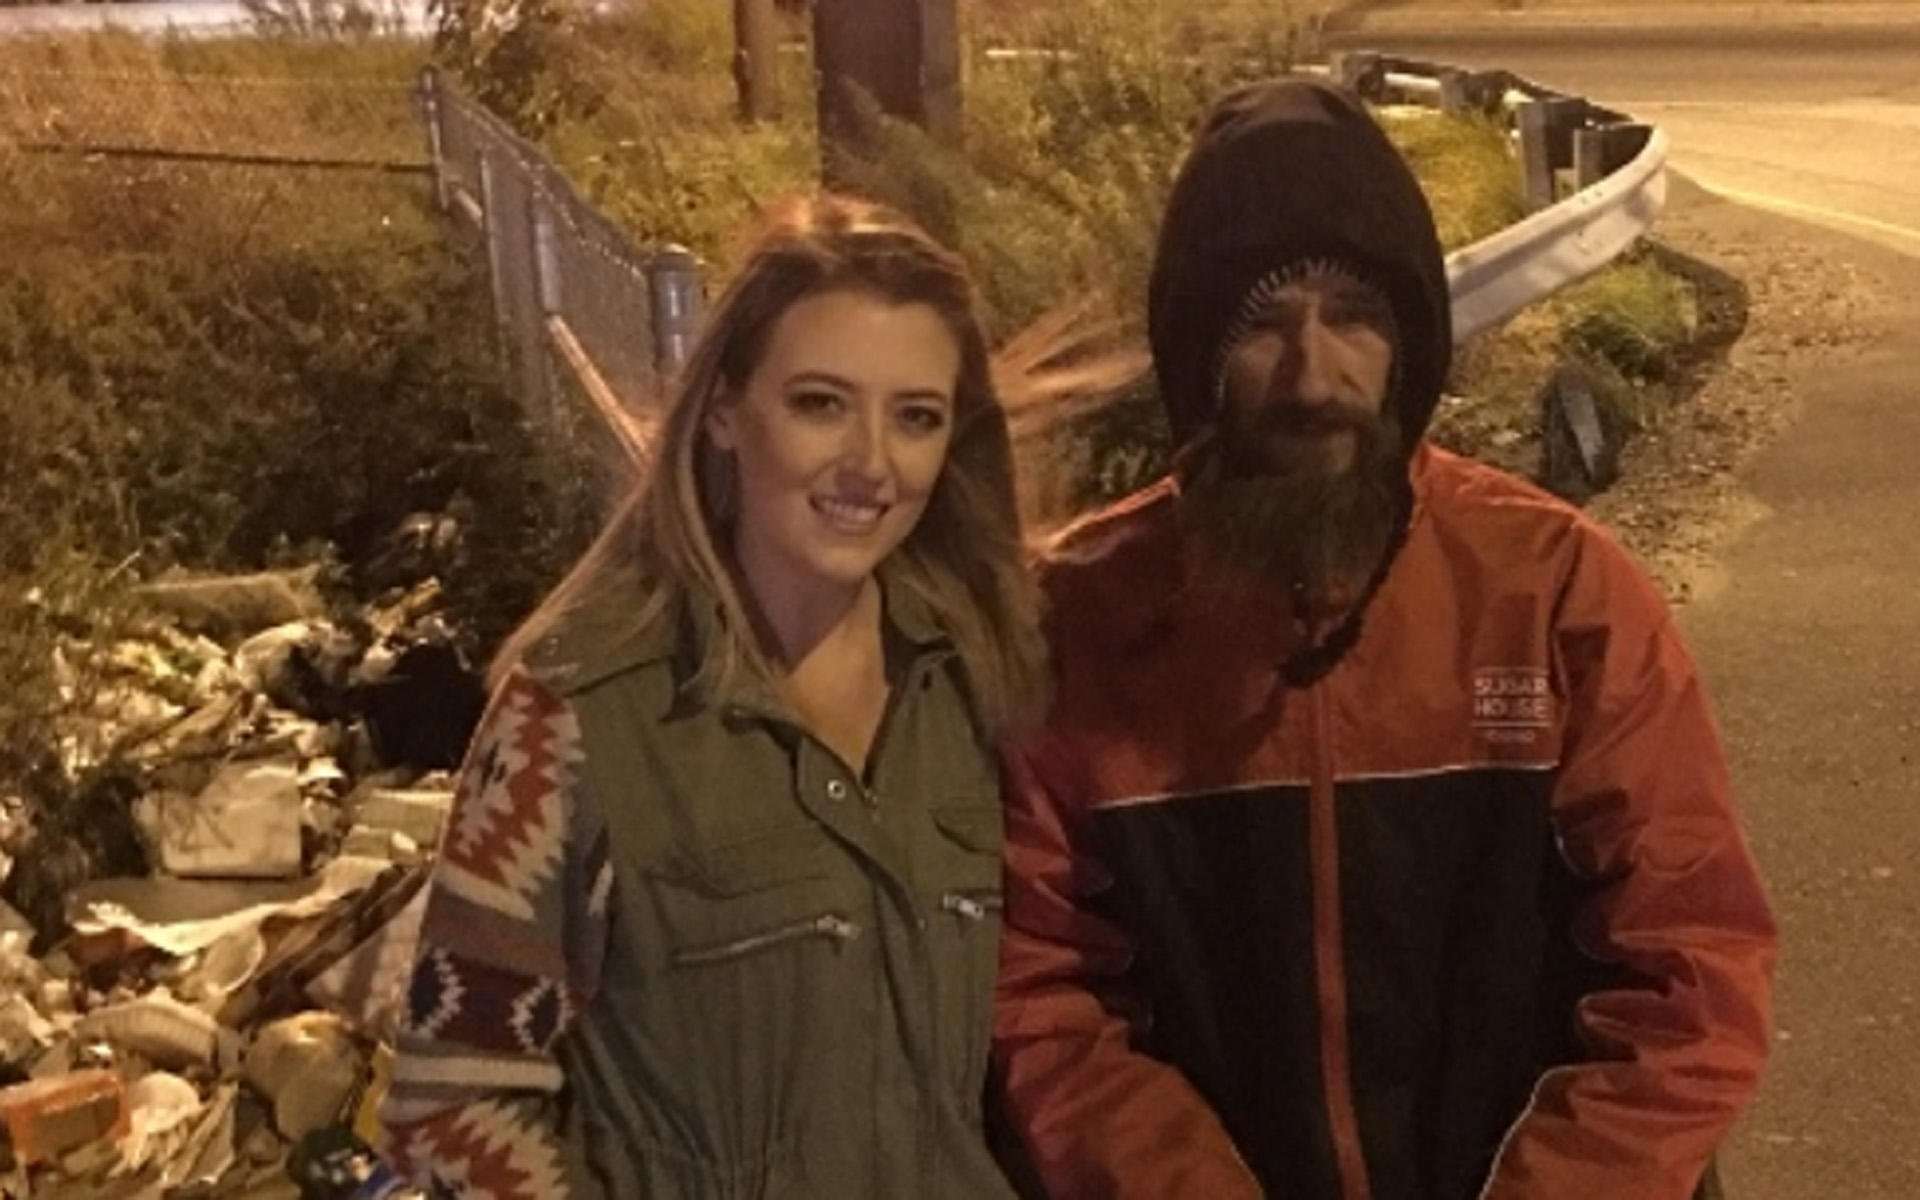 image for Homeless man who gave away his last $20 buys home thanks to fundraiser